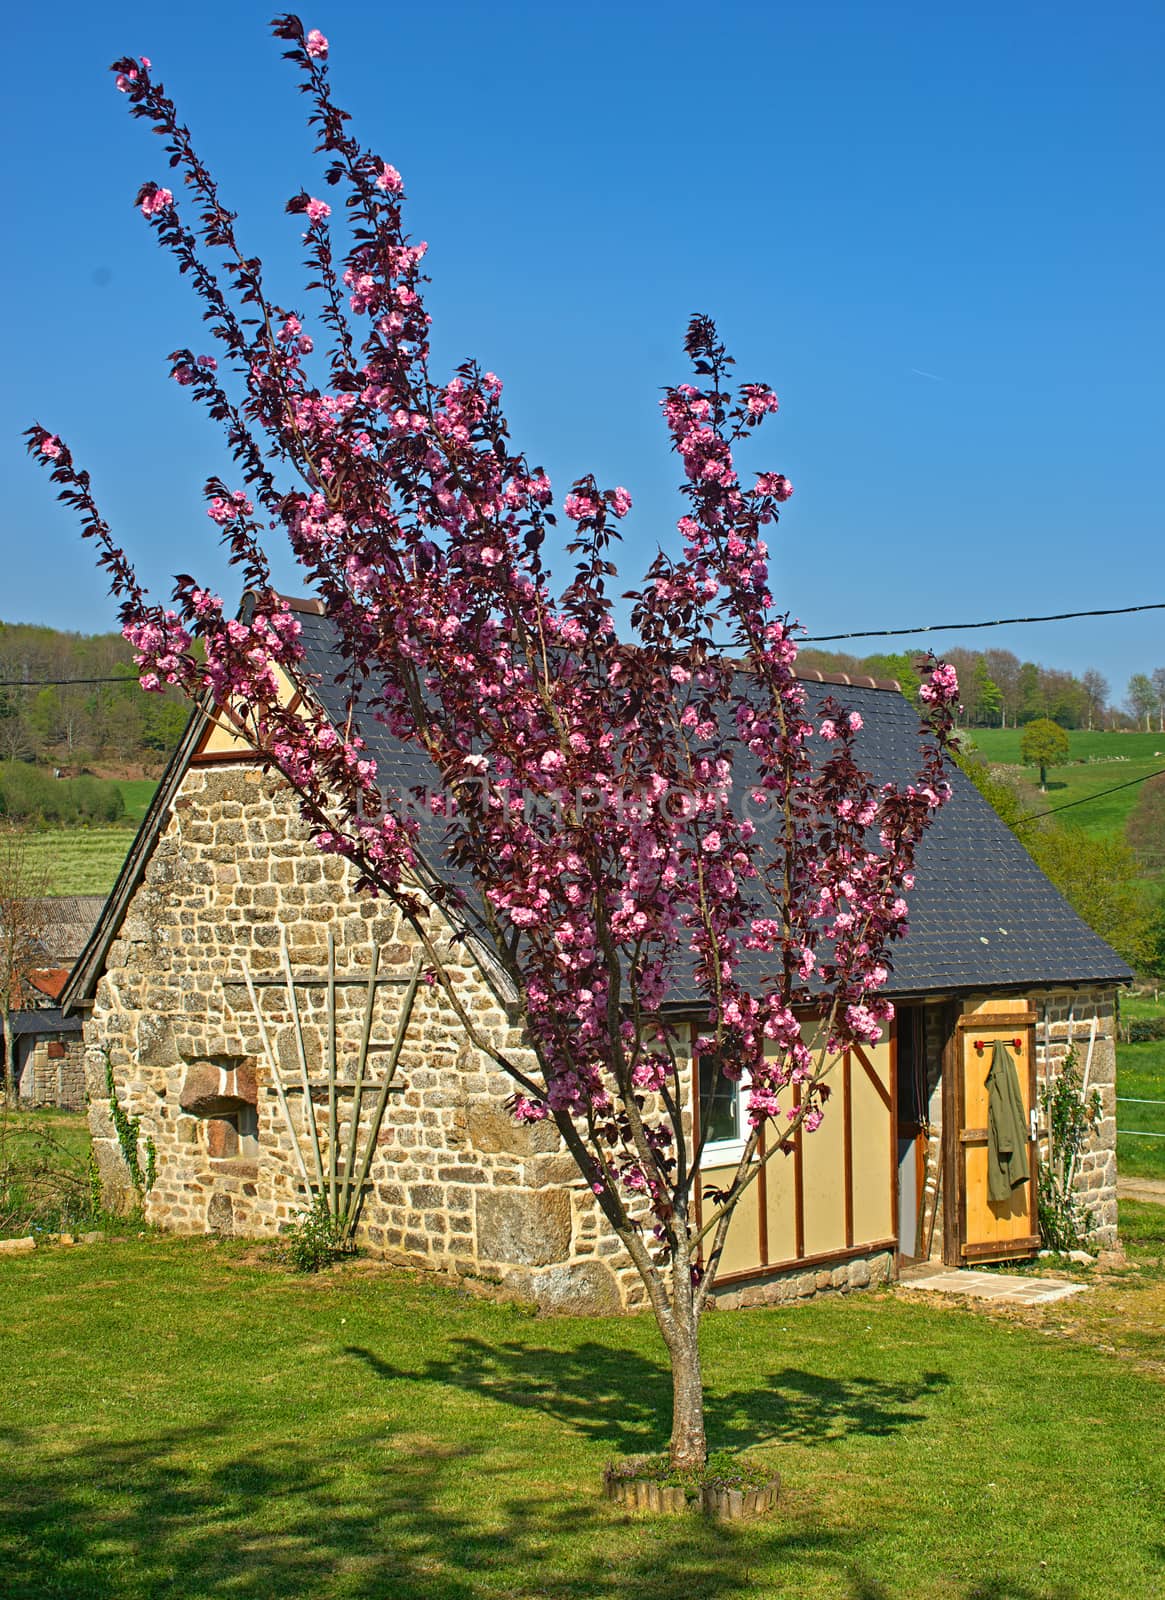 Tree blooming with pink flowers in front of small stone house by sheriffkule